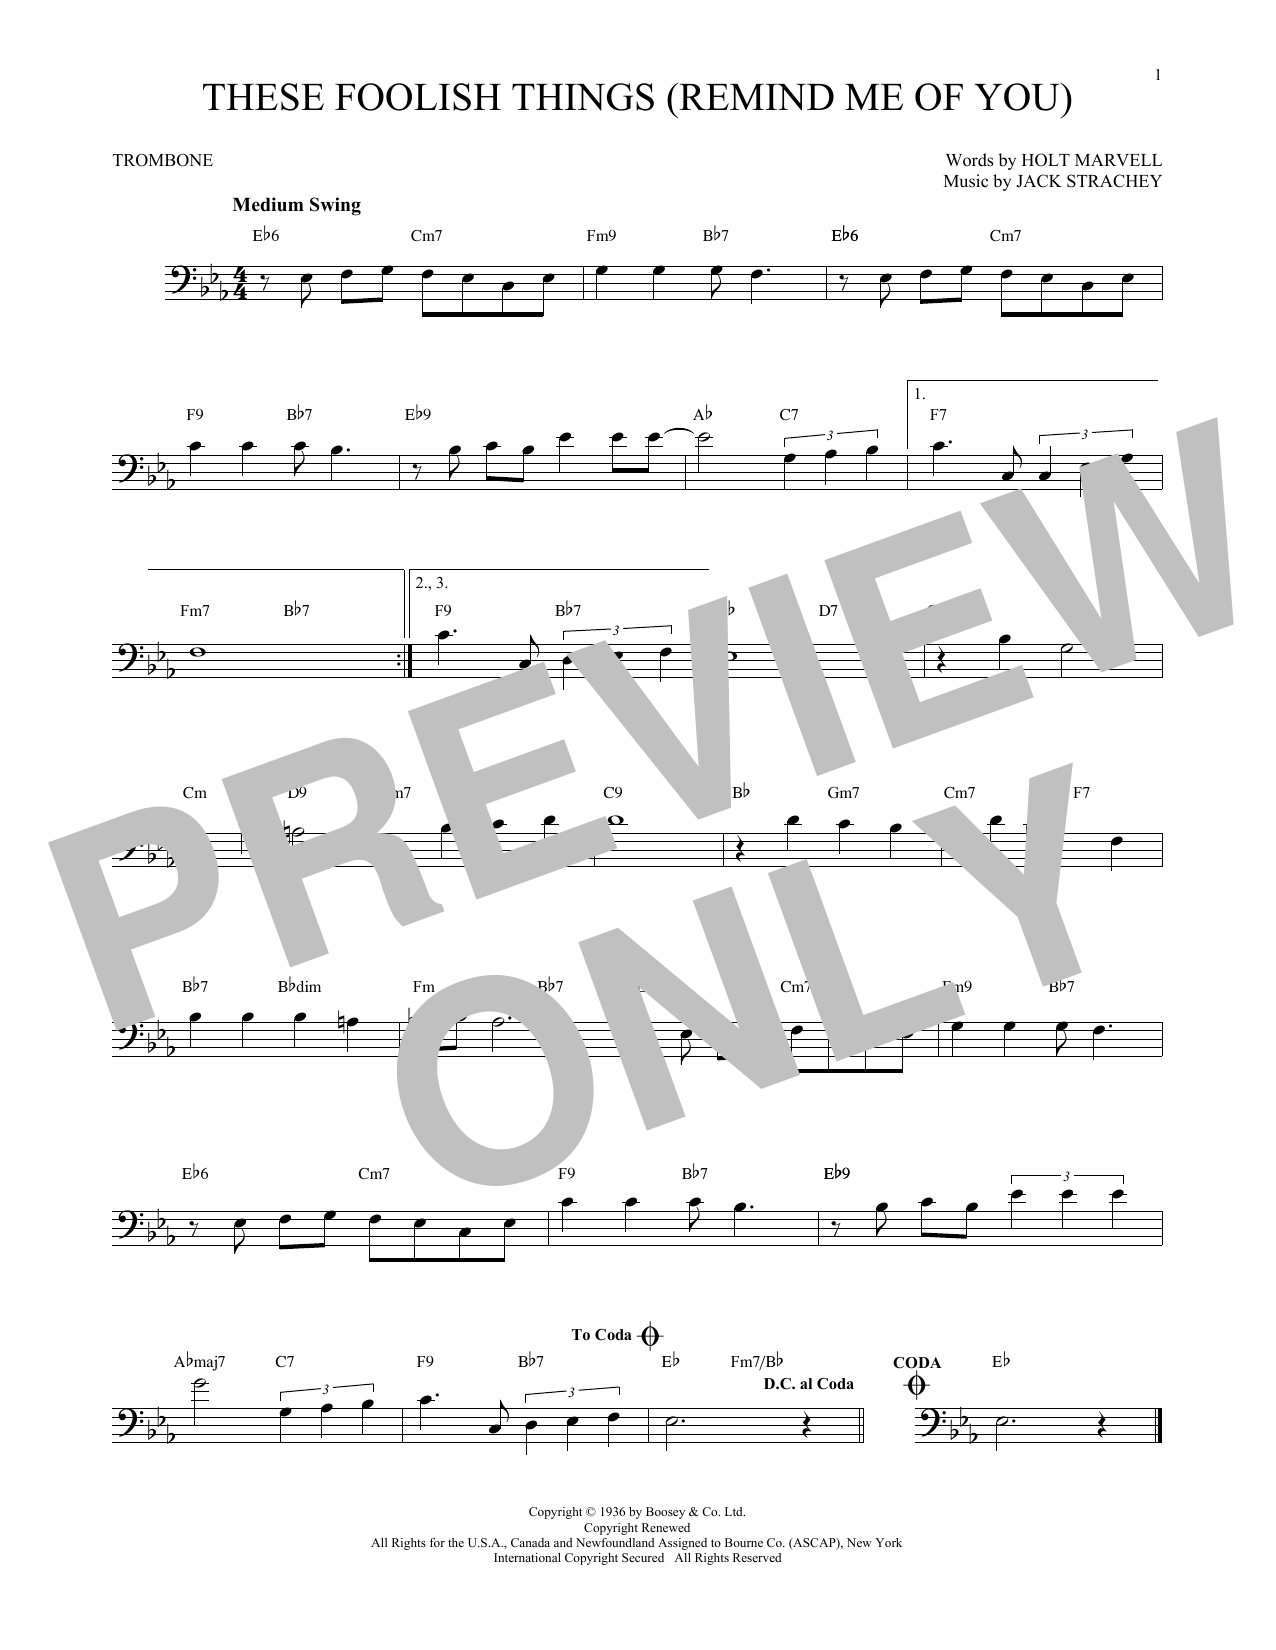 Download Holt Marvell These Foolish Things (Remind Me Of You) Sheet Music